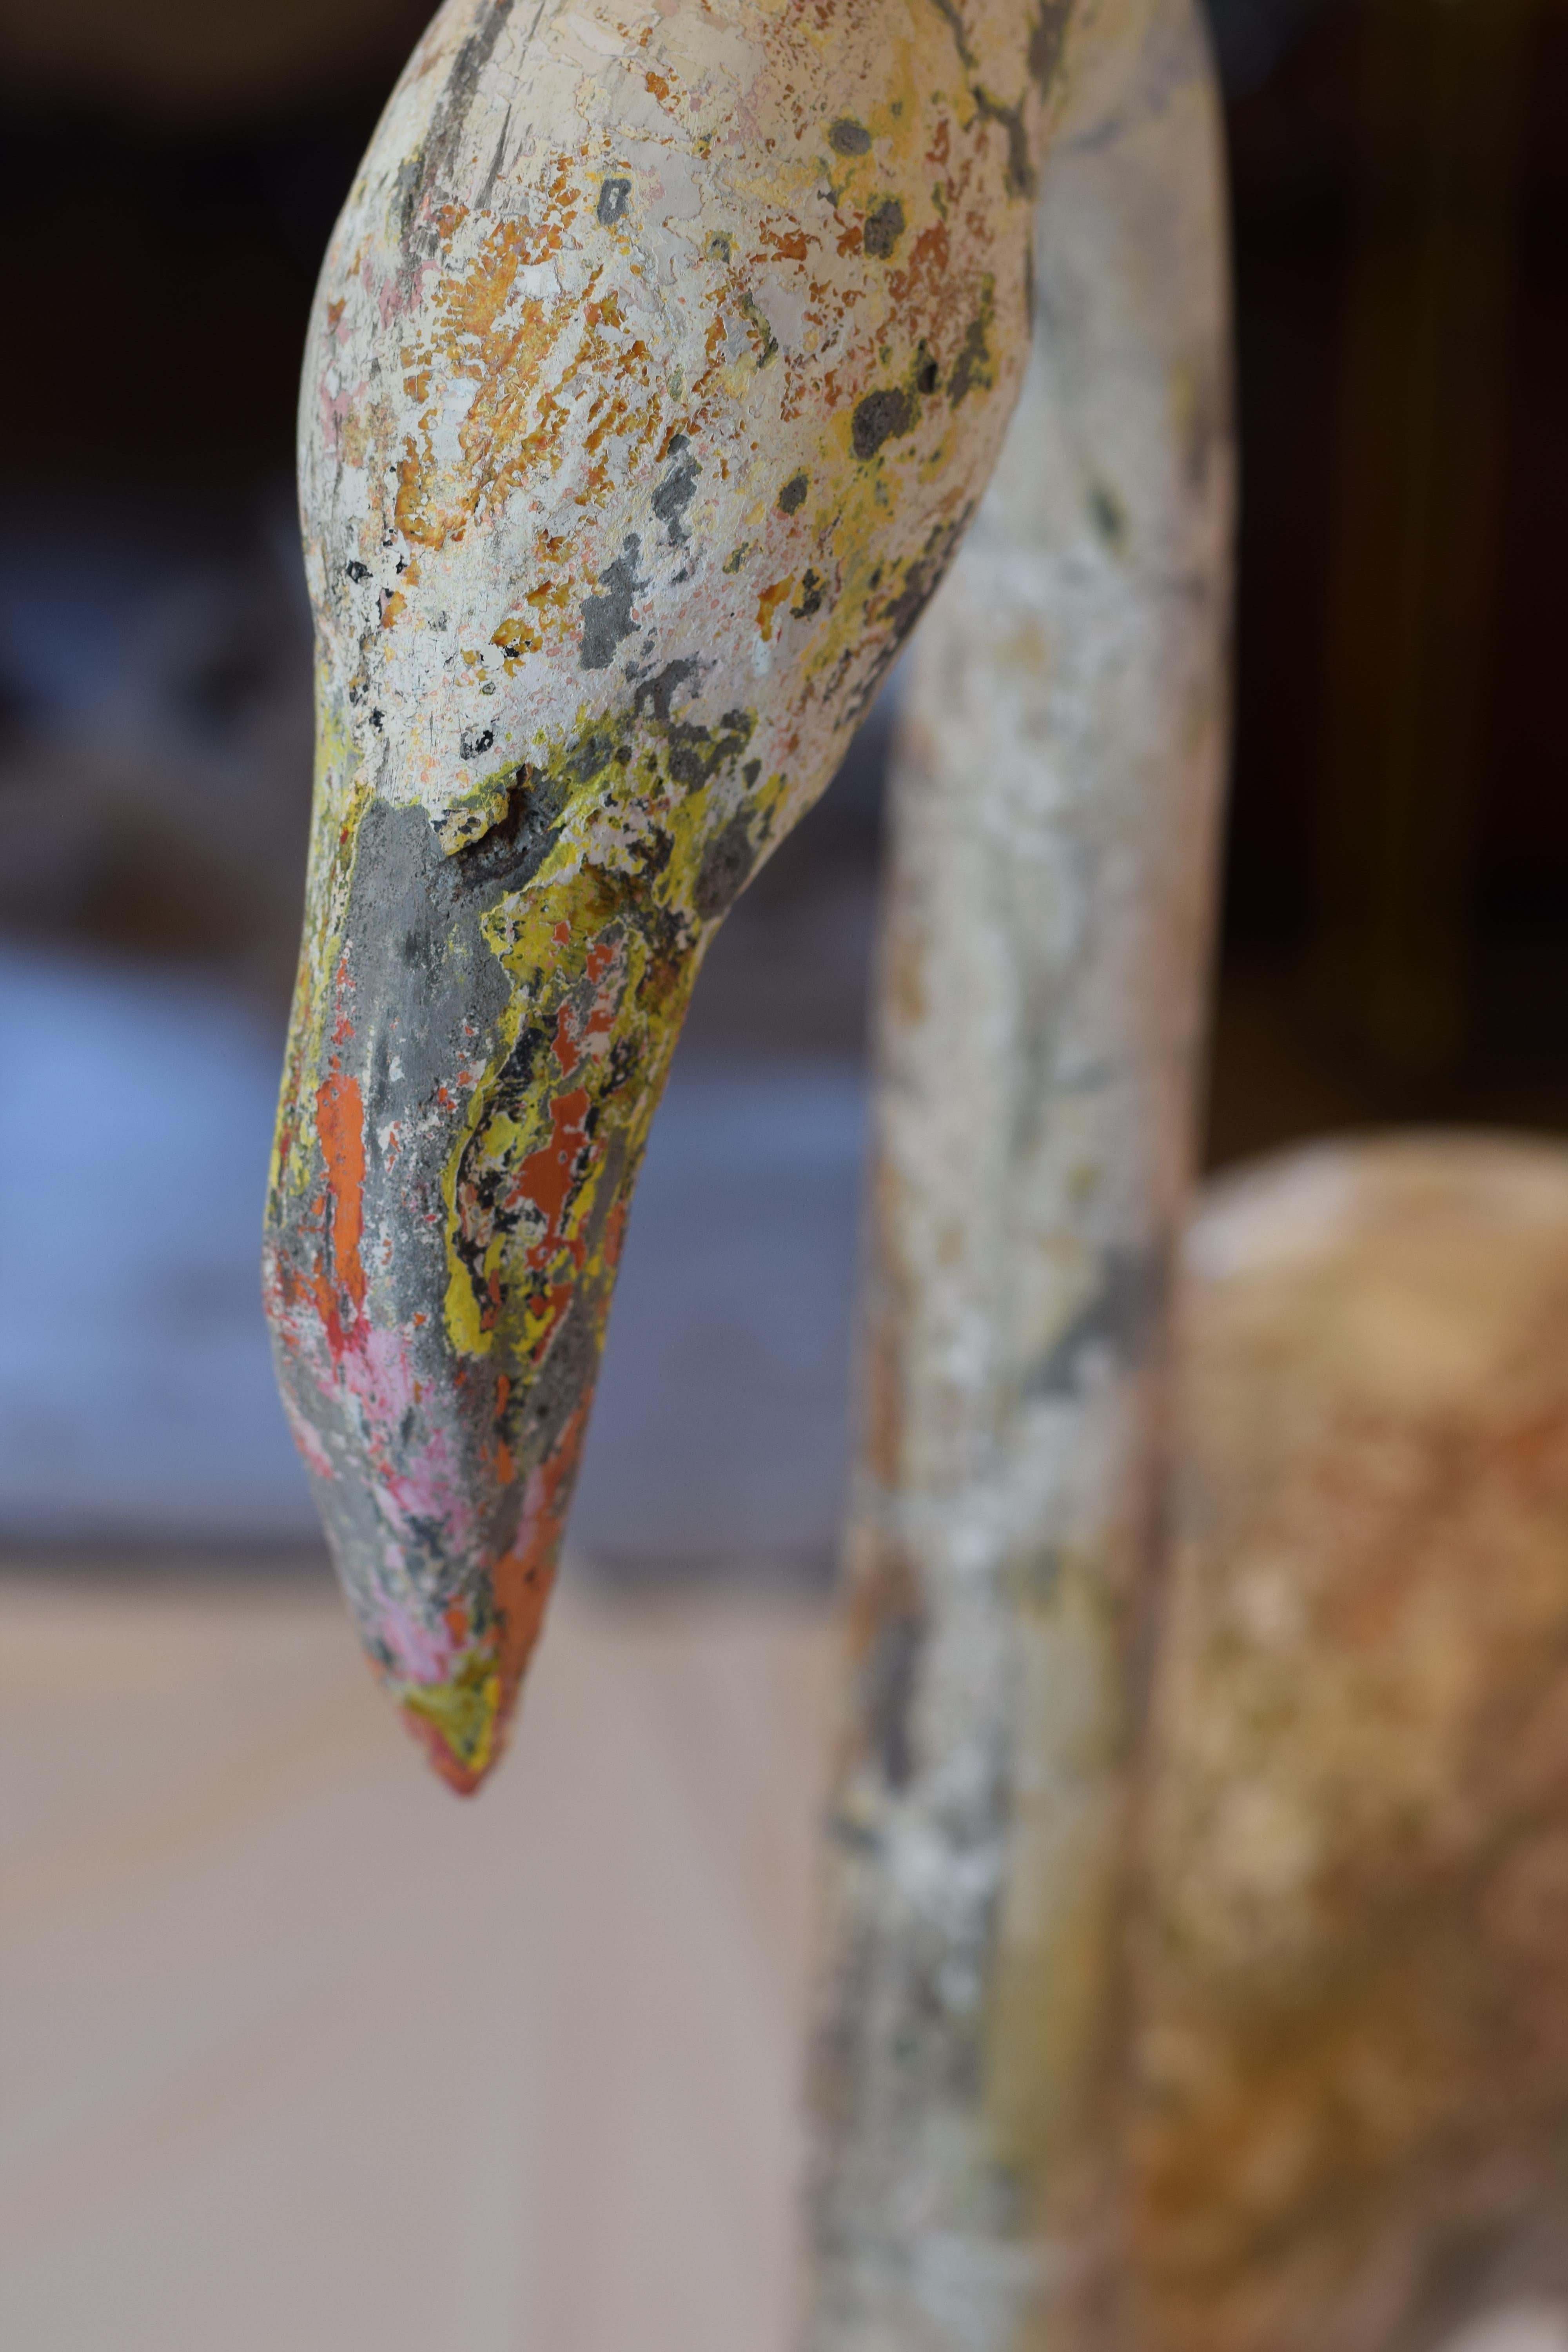 We found this colorful concrete flamingo in France. Heavy and sturdy, the concrete bird stands solidly on legs made of iron sunk into a concrete base. The body of the flamingo retains traces of the original paint which has been worn and dulled by